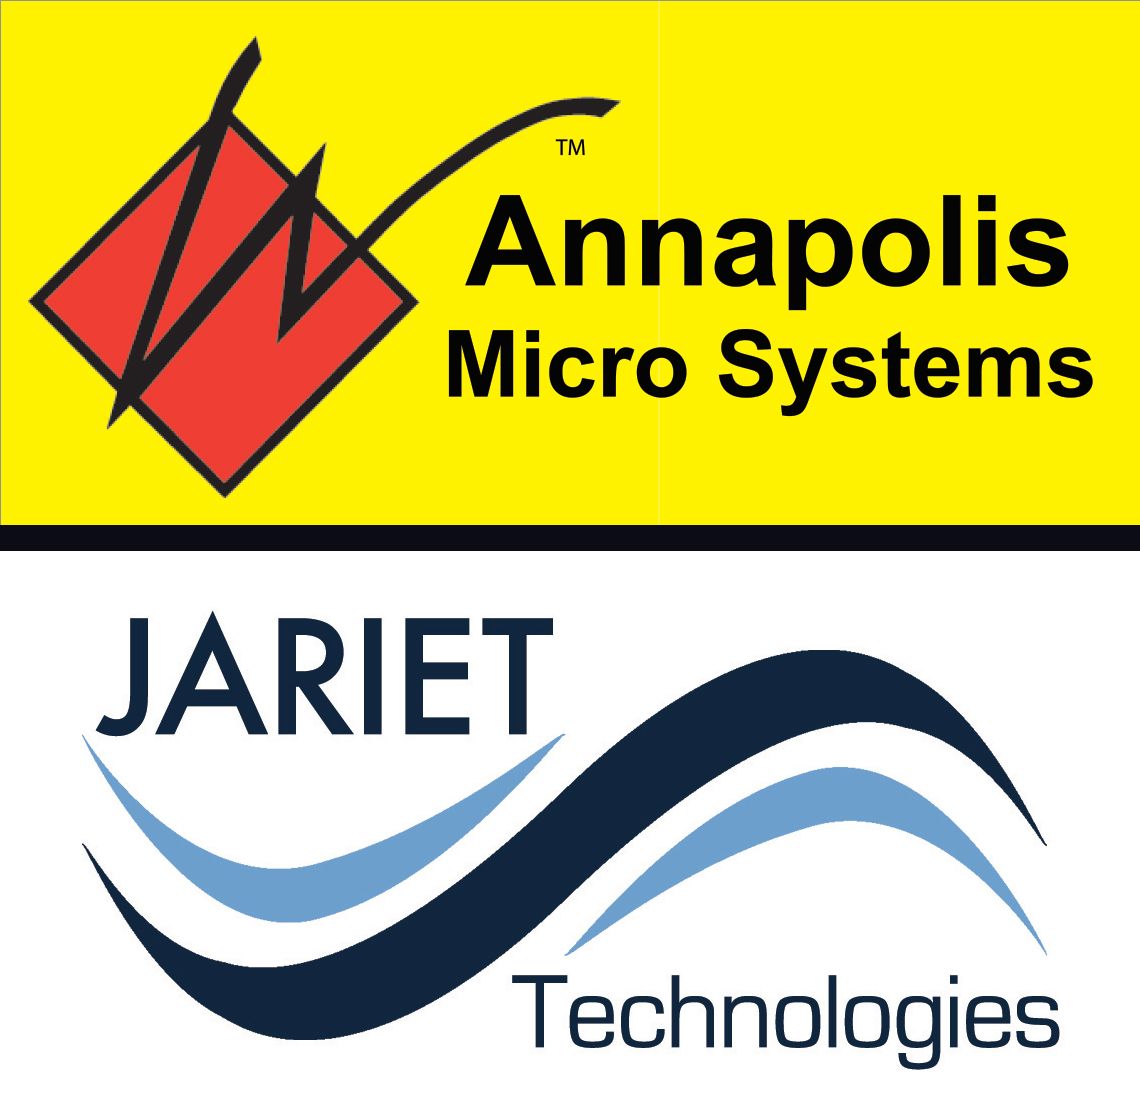 Annapolis Micro systems / Jariet